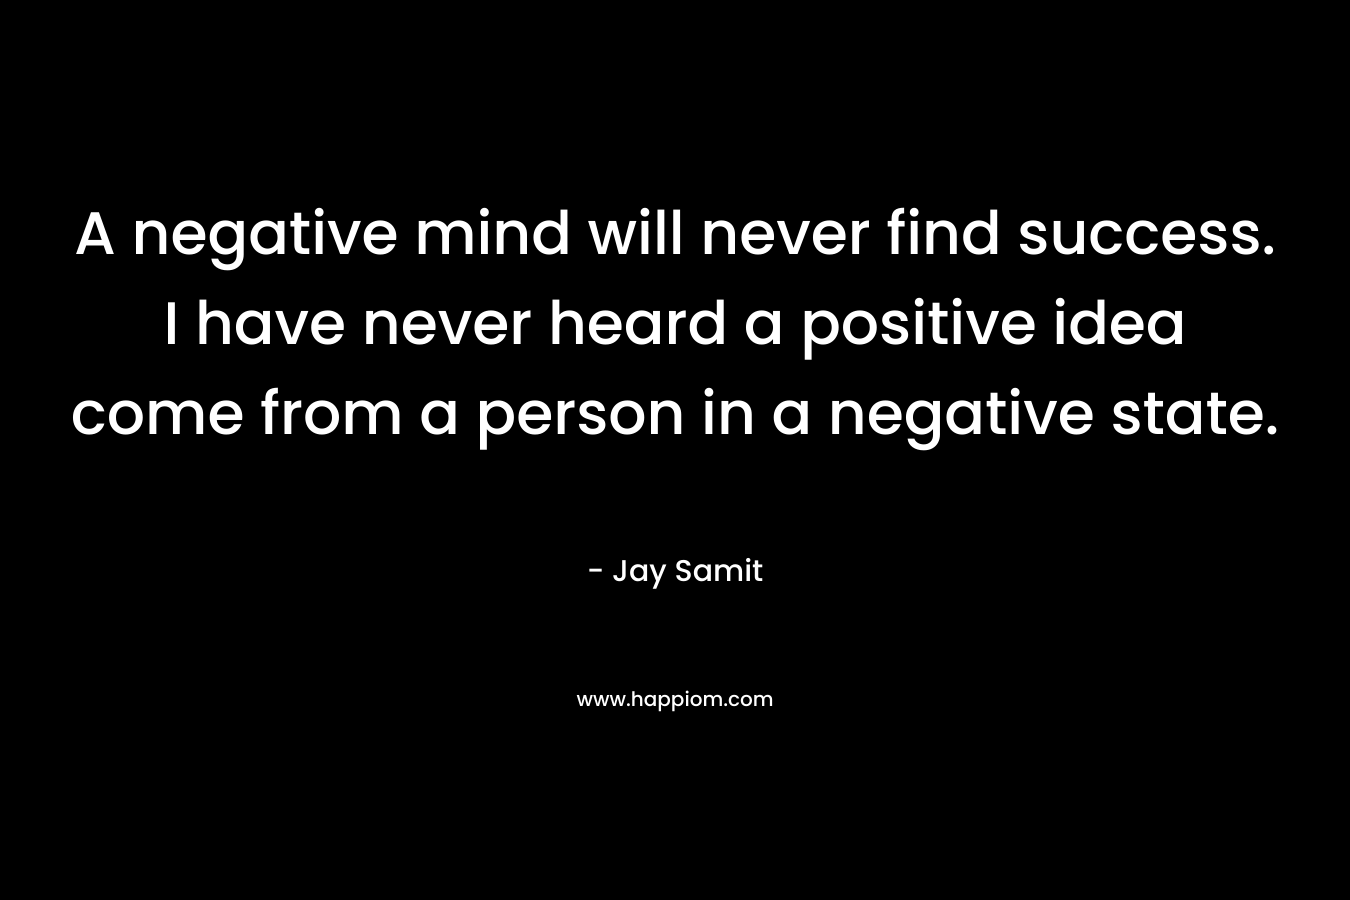 A negative mind will never find success. I have never heard a positive idea come from a person in a negative state.